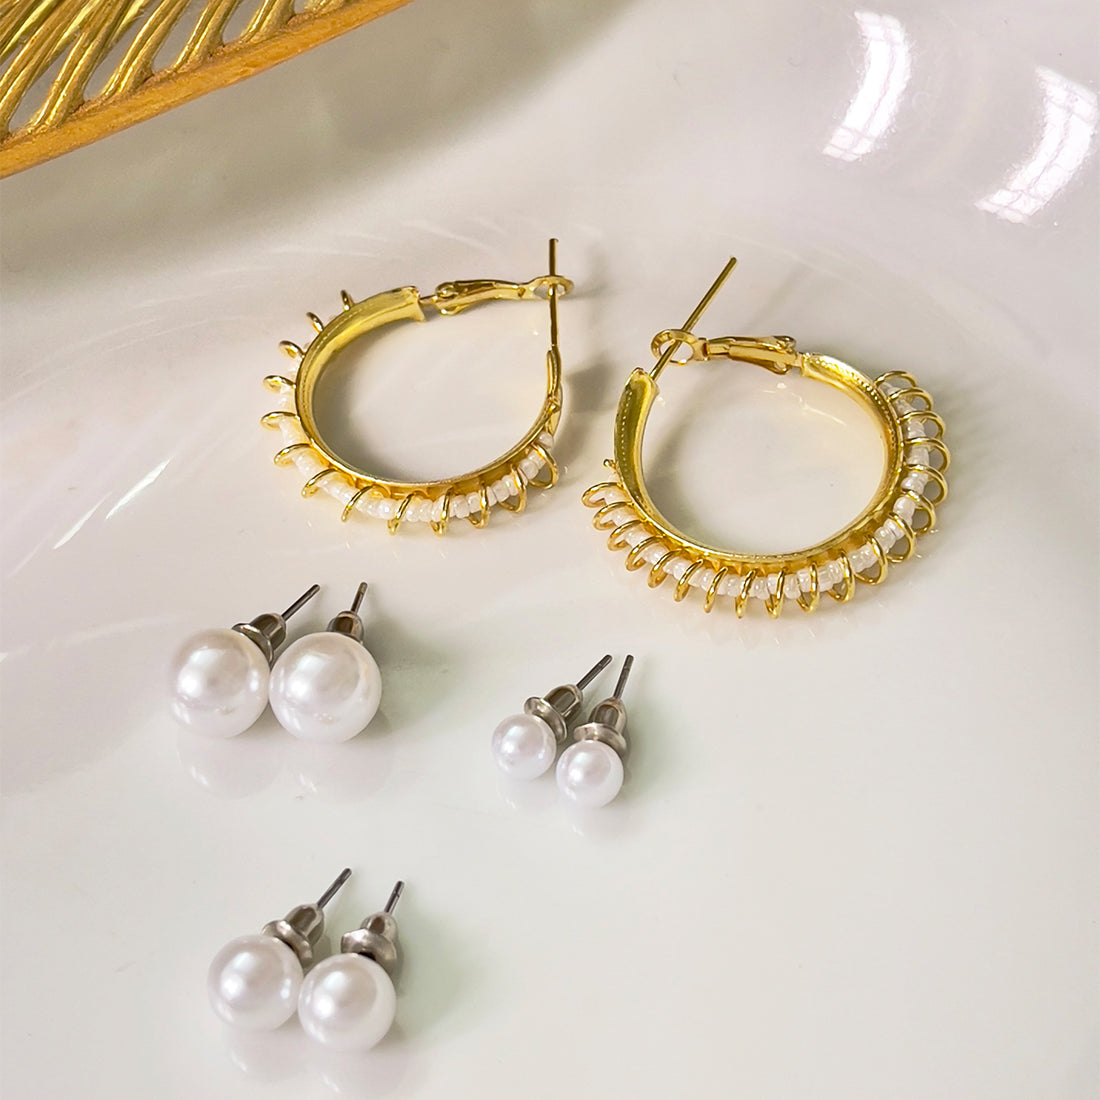 Set Of 4 White Pearl Studs In Different Sizes & Gold-Toned Wire Wrapped Hoop Earrings